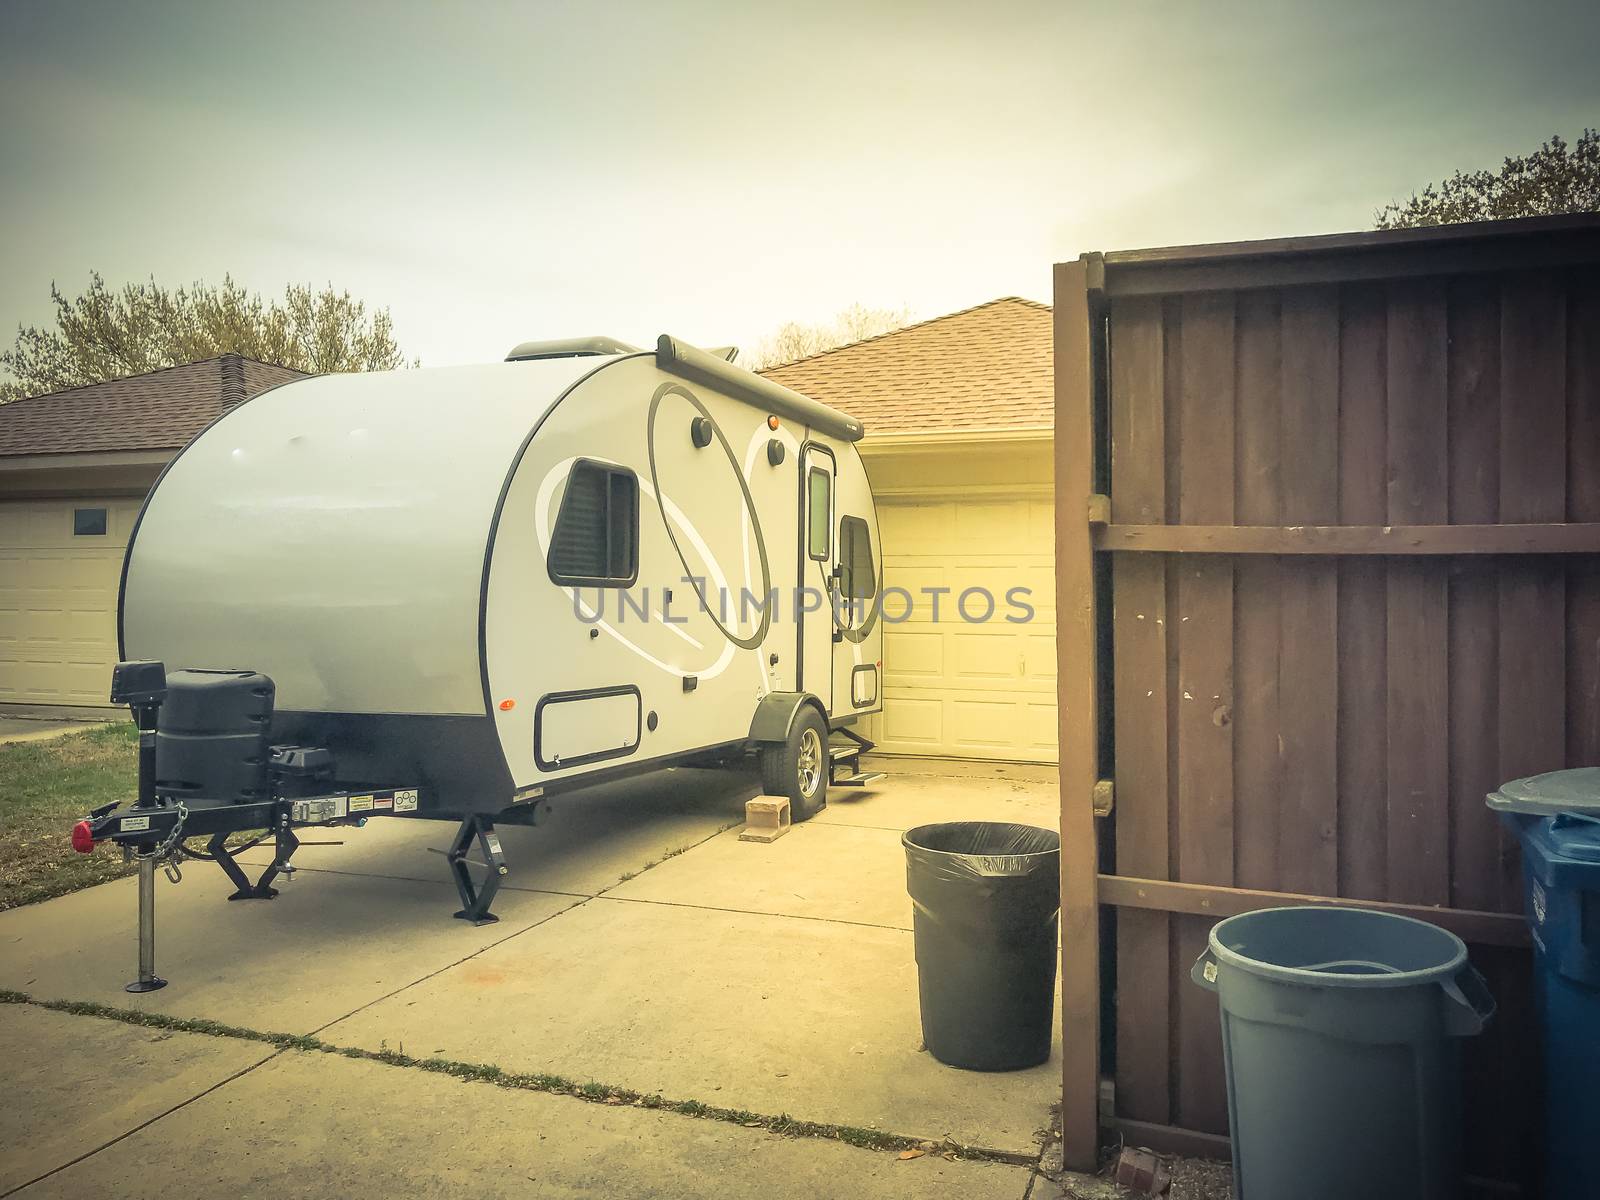 Rear view of RV trailer parked at house garage backyard